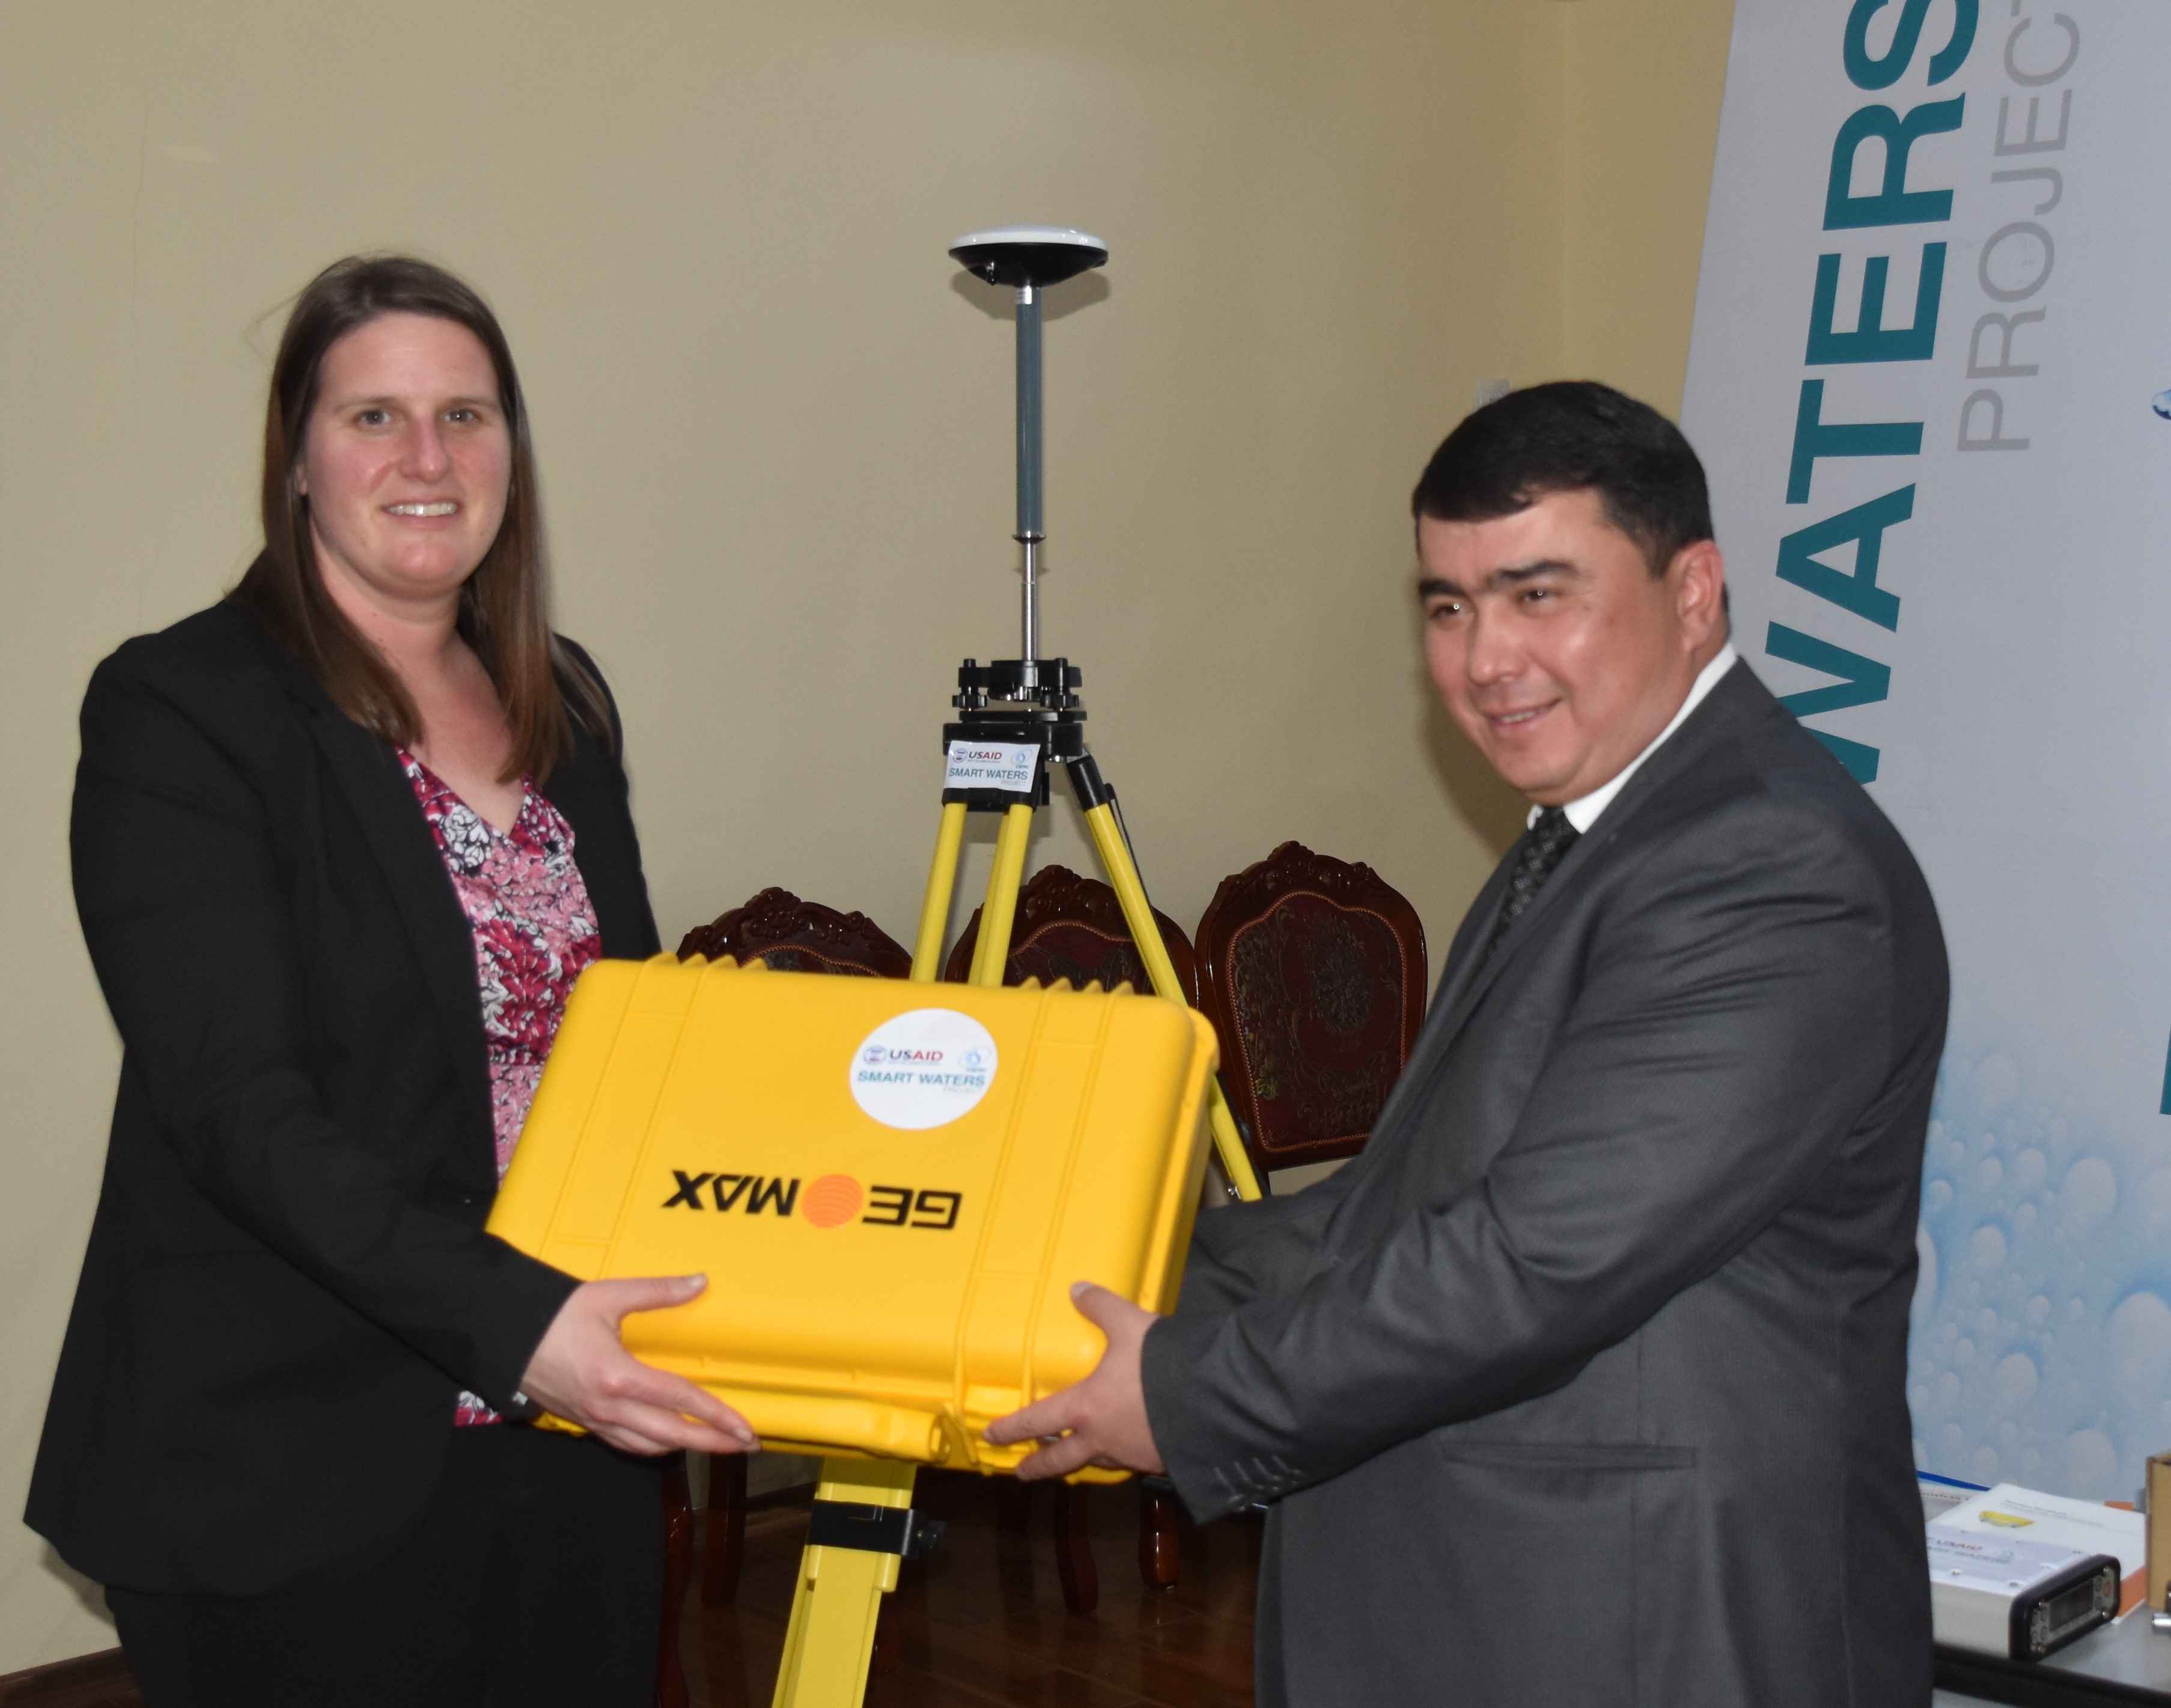 CAREC and USAID handed over a high-precision measuring GIS equipment to water specialists of Tajikistan